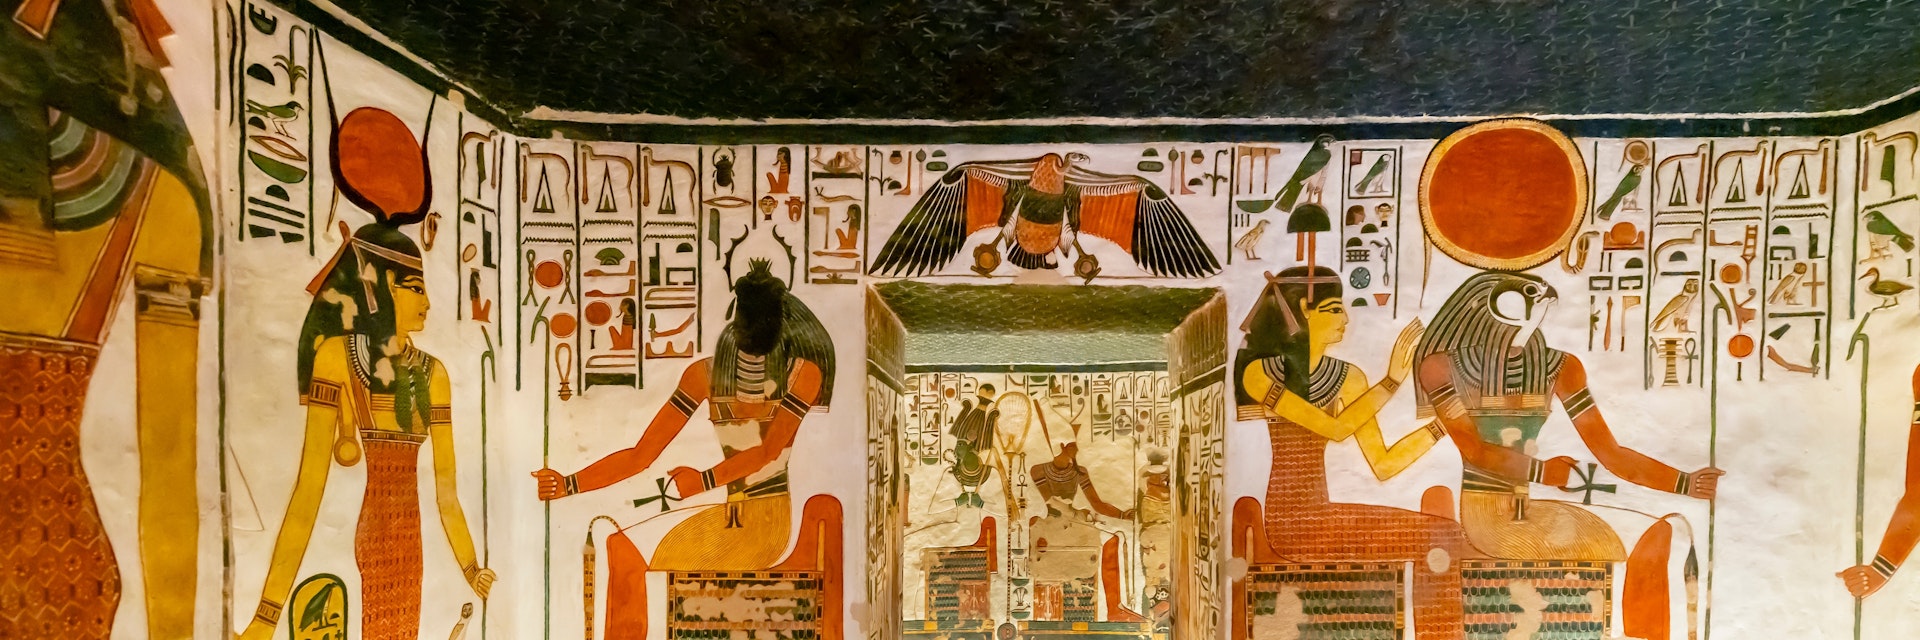 Interior view of the lower Chambers of Tomb QV66 Queen Nefertari, with Gods Hathor, Sekhmet, and Ra Horakhty visible, in the Valley of the Queens, Luxor, Egypt.